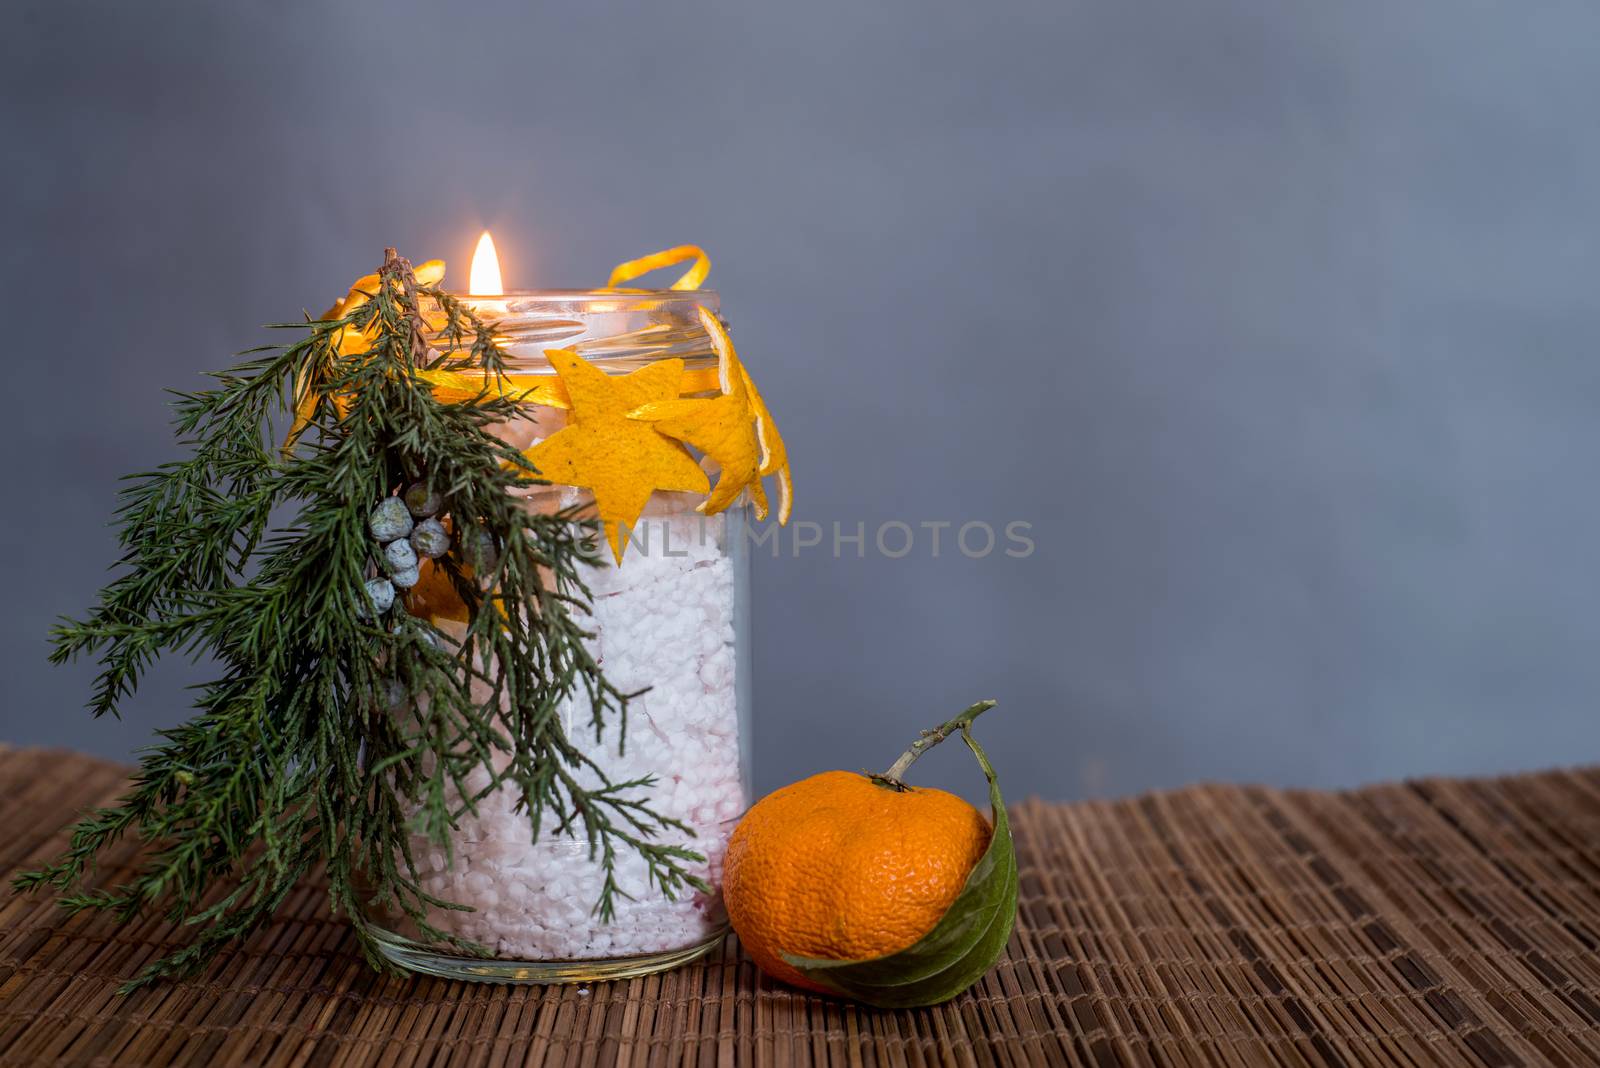 christmas hand made candle craft on the eastern style wooden tablecloth on gray background by Desperada